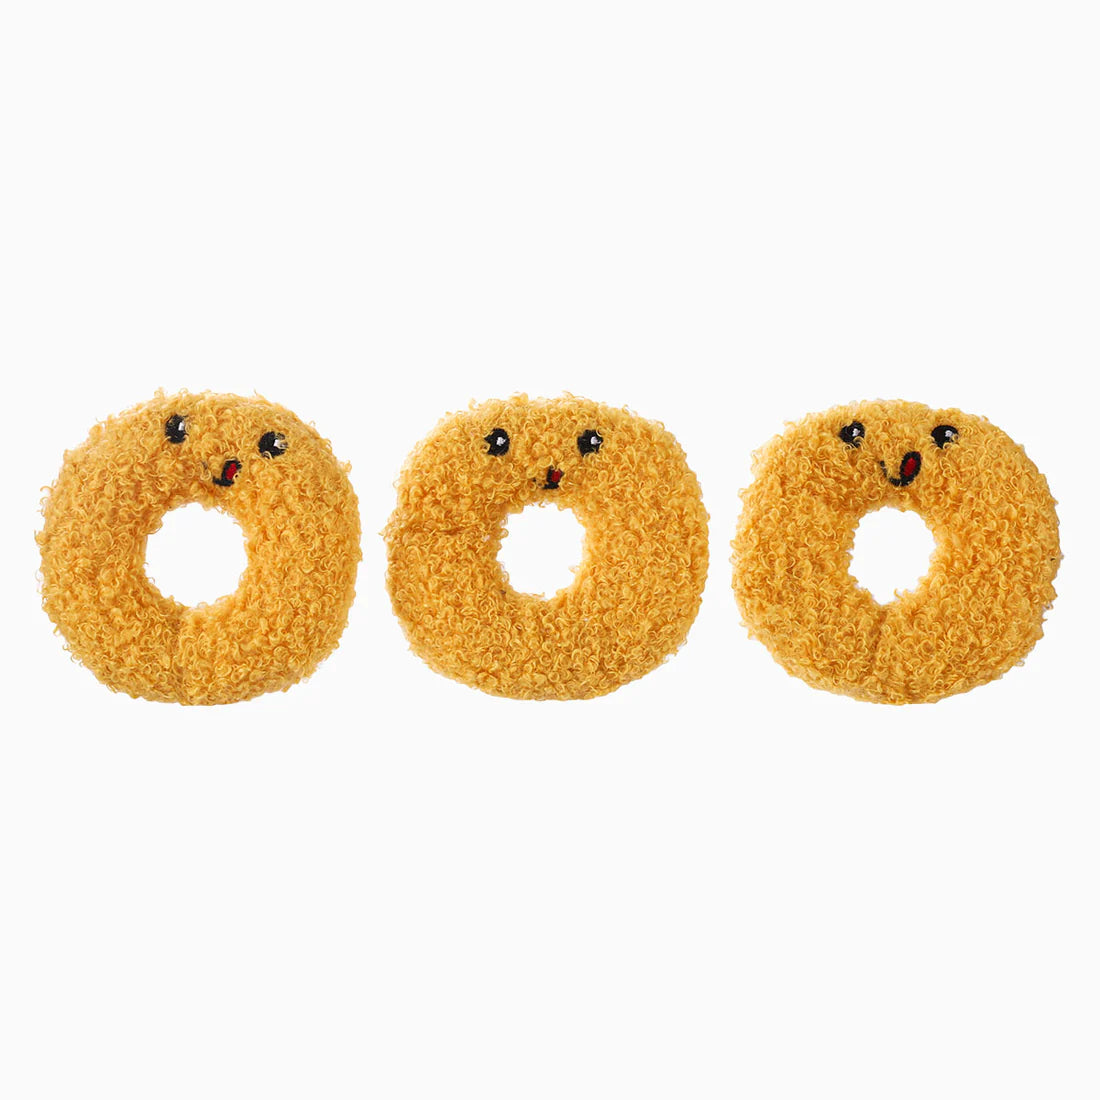 HugSmart: Food Party - Onion Ring